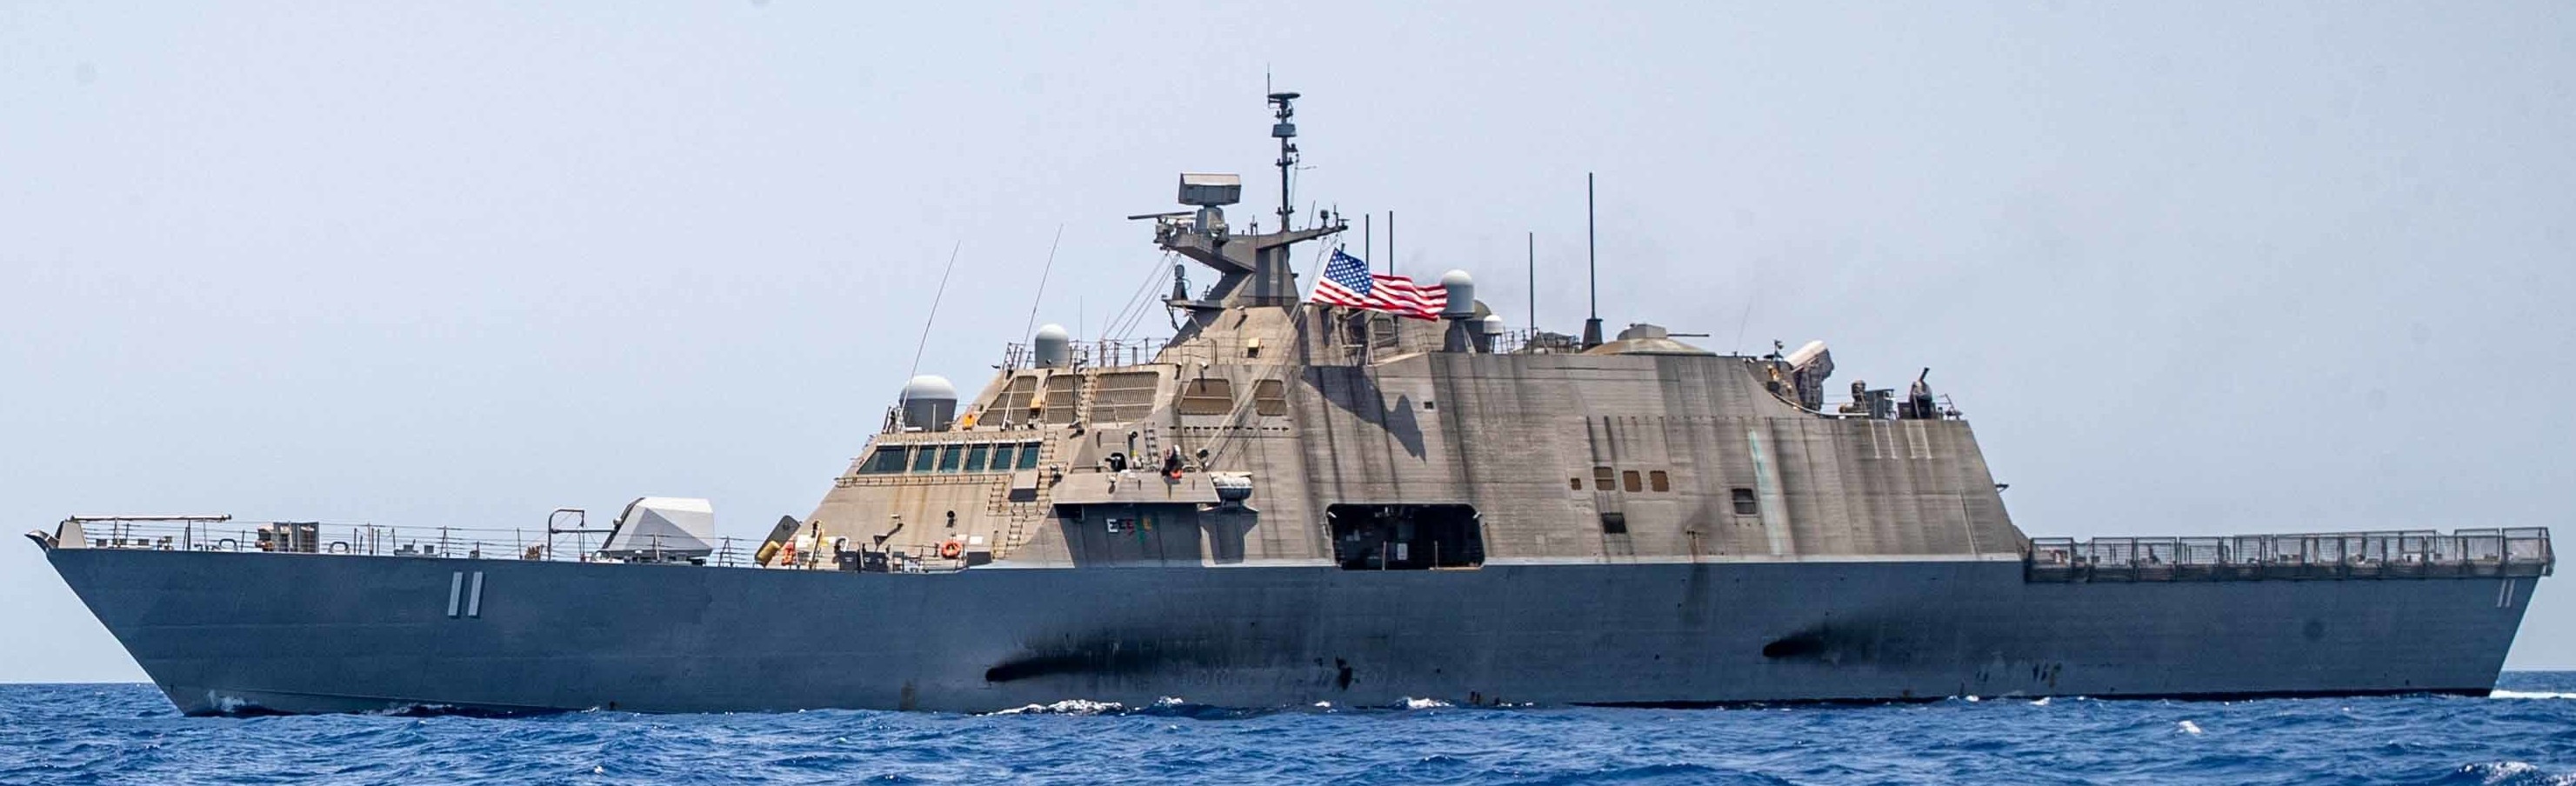 lcs-11 uss sioux city freedom class littoral combat ship us navy red sea 106